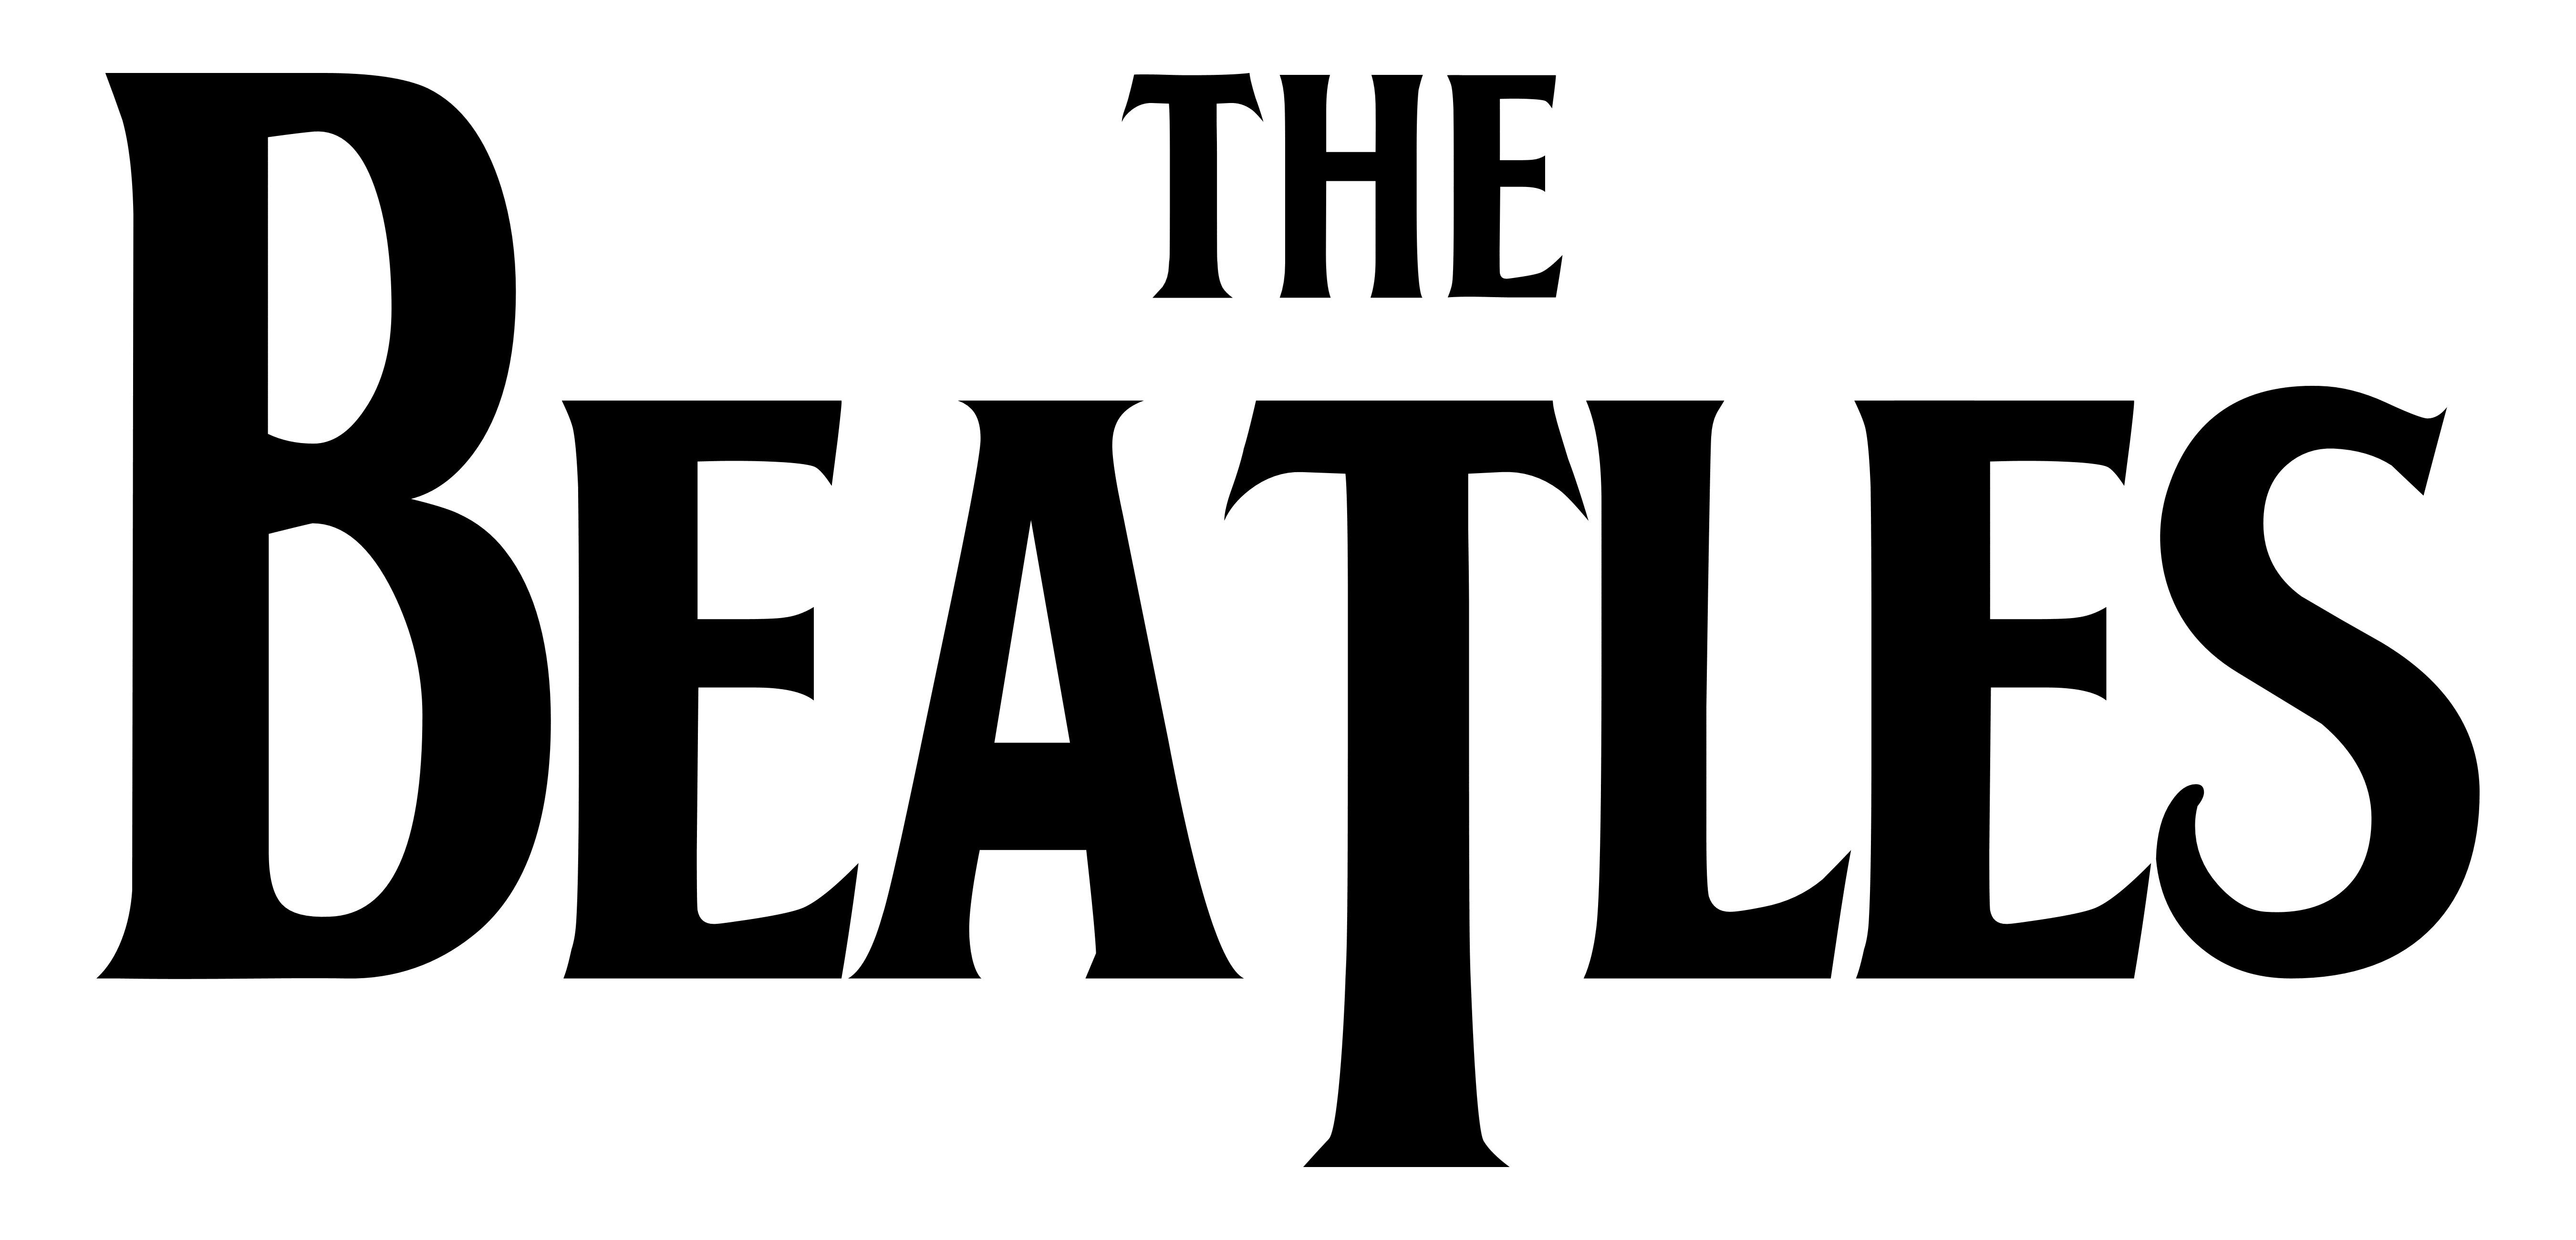 The Beatles Band Logo - Beatles Logo, Beatles Symbol, Meaning, History and Evolution